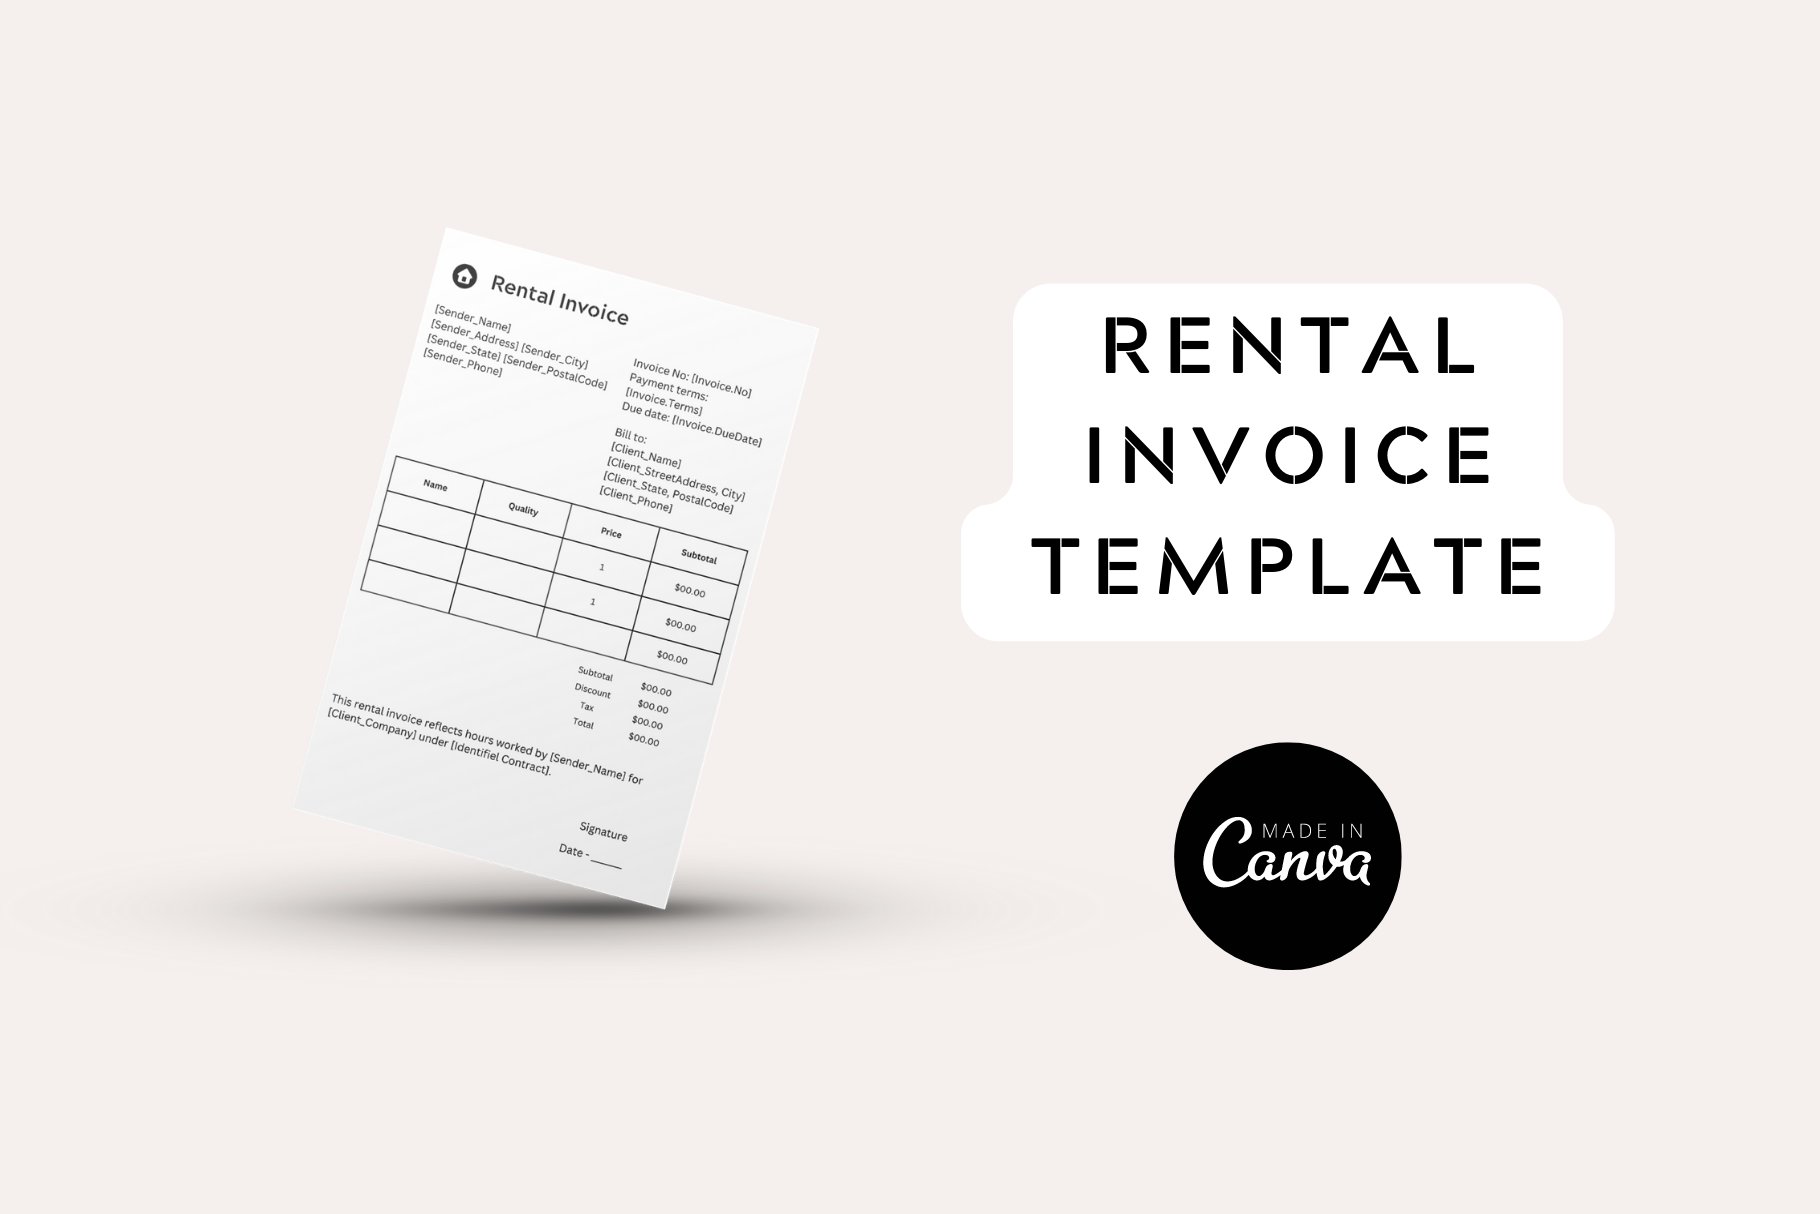 Monthly rent invoice template cover image.